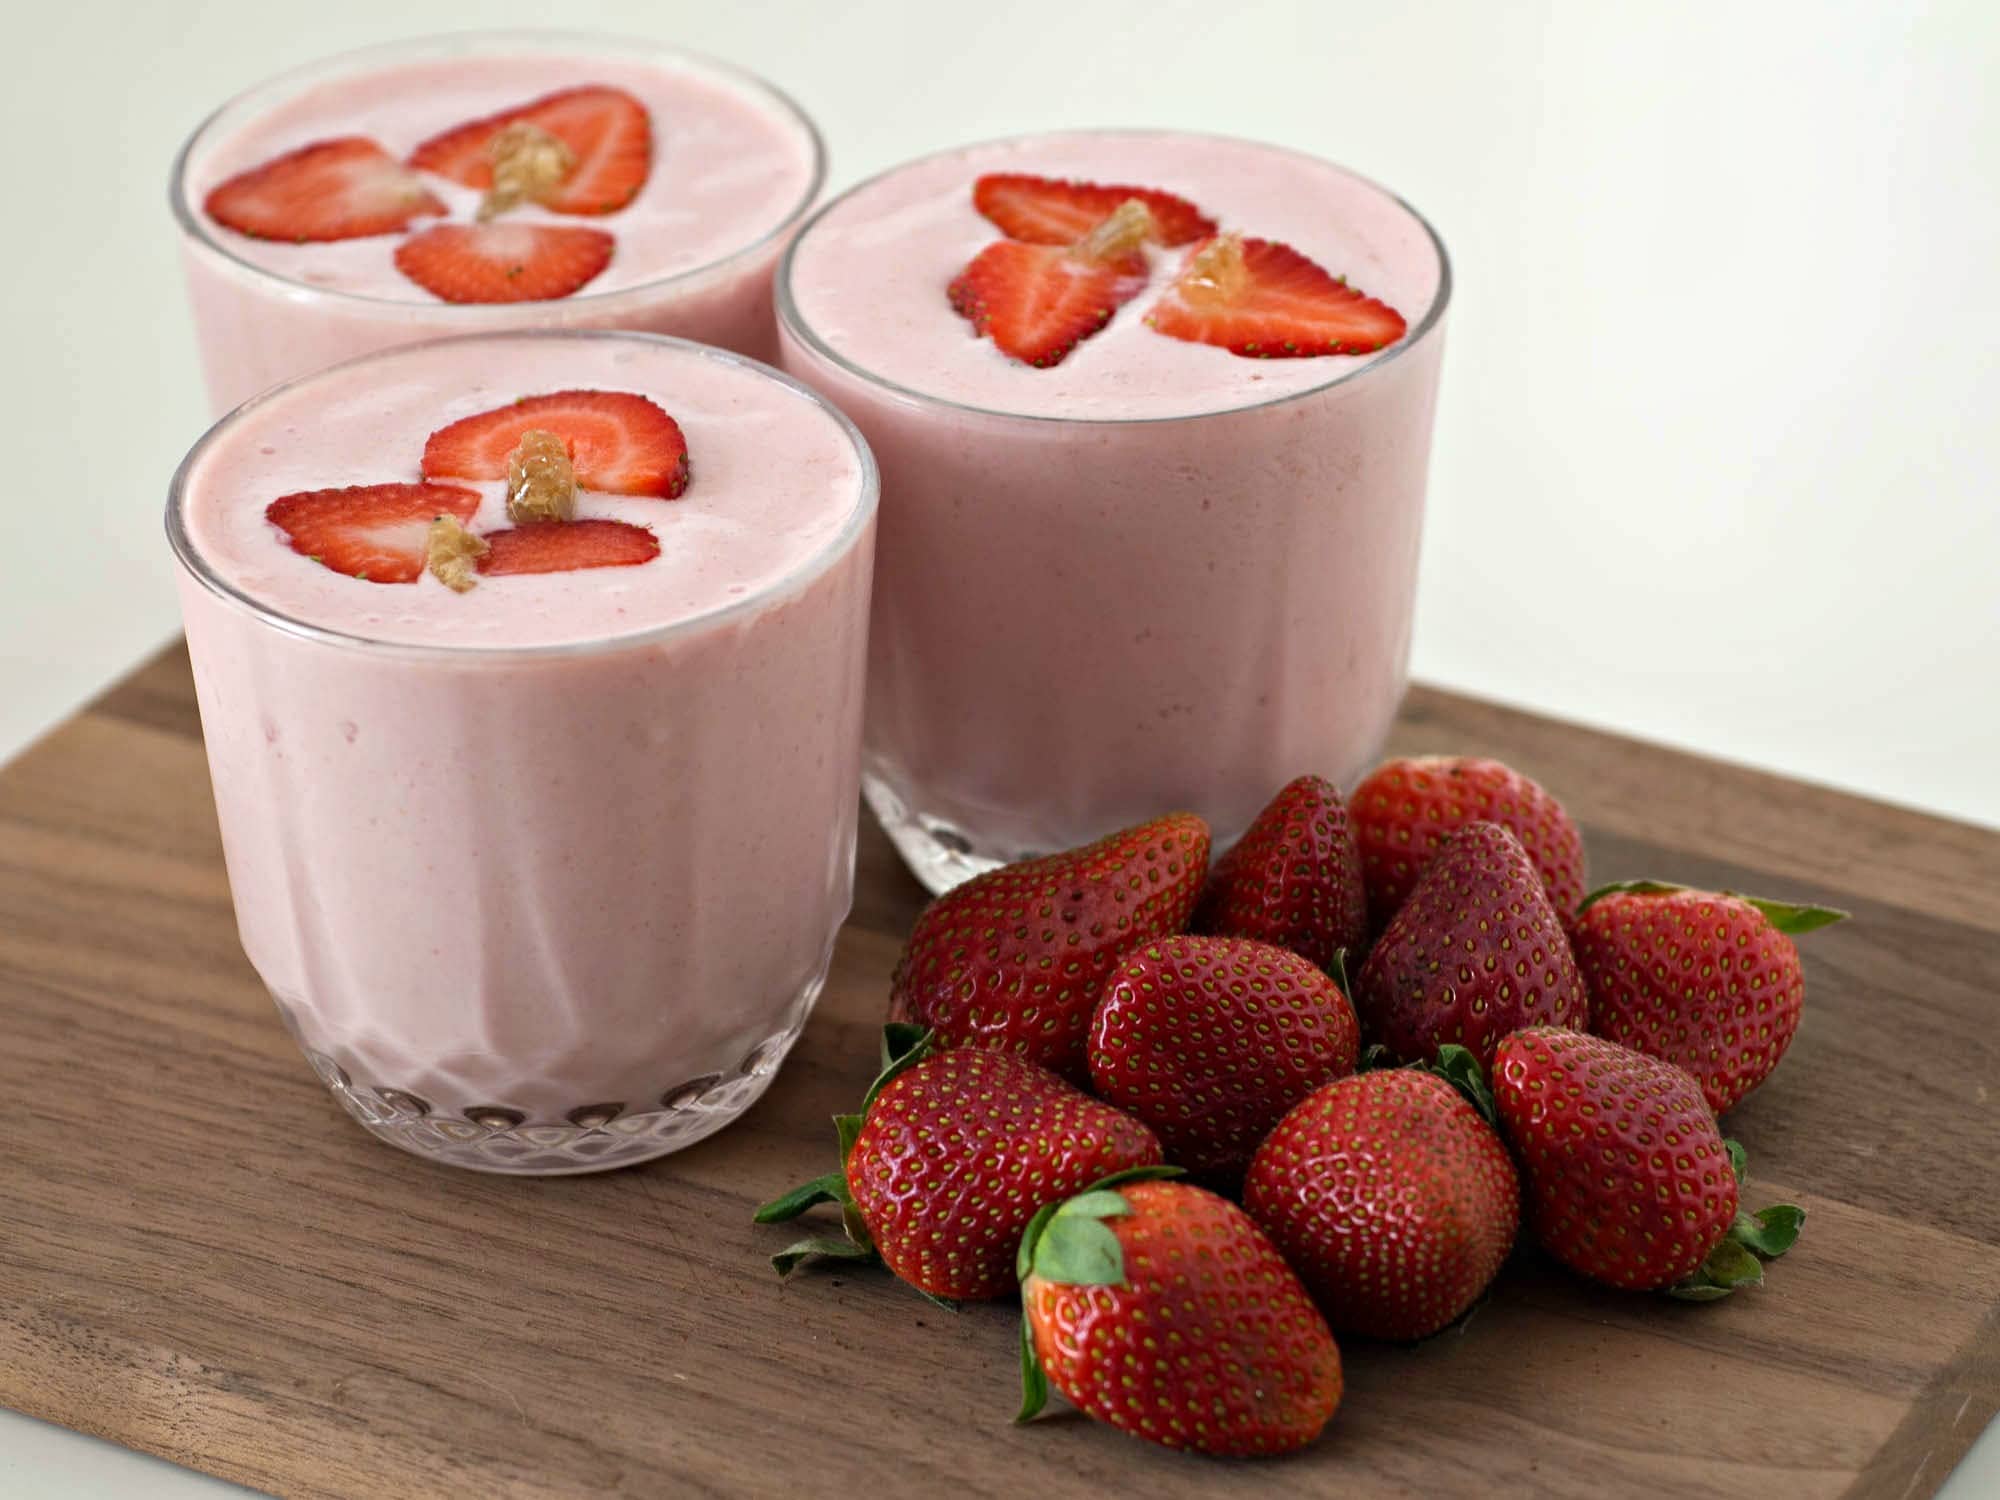 Three glasses of strawberry smoothie on a wooden cutting board.